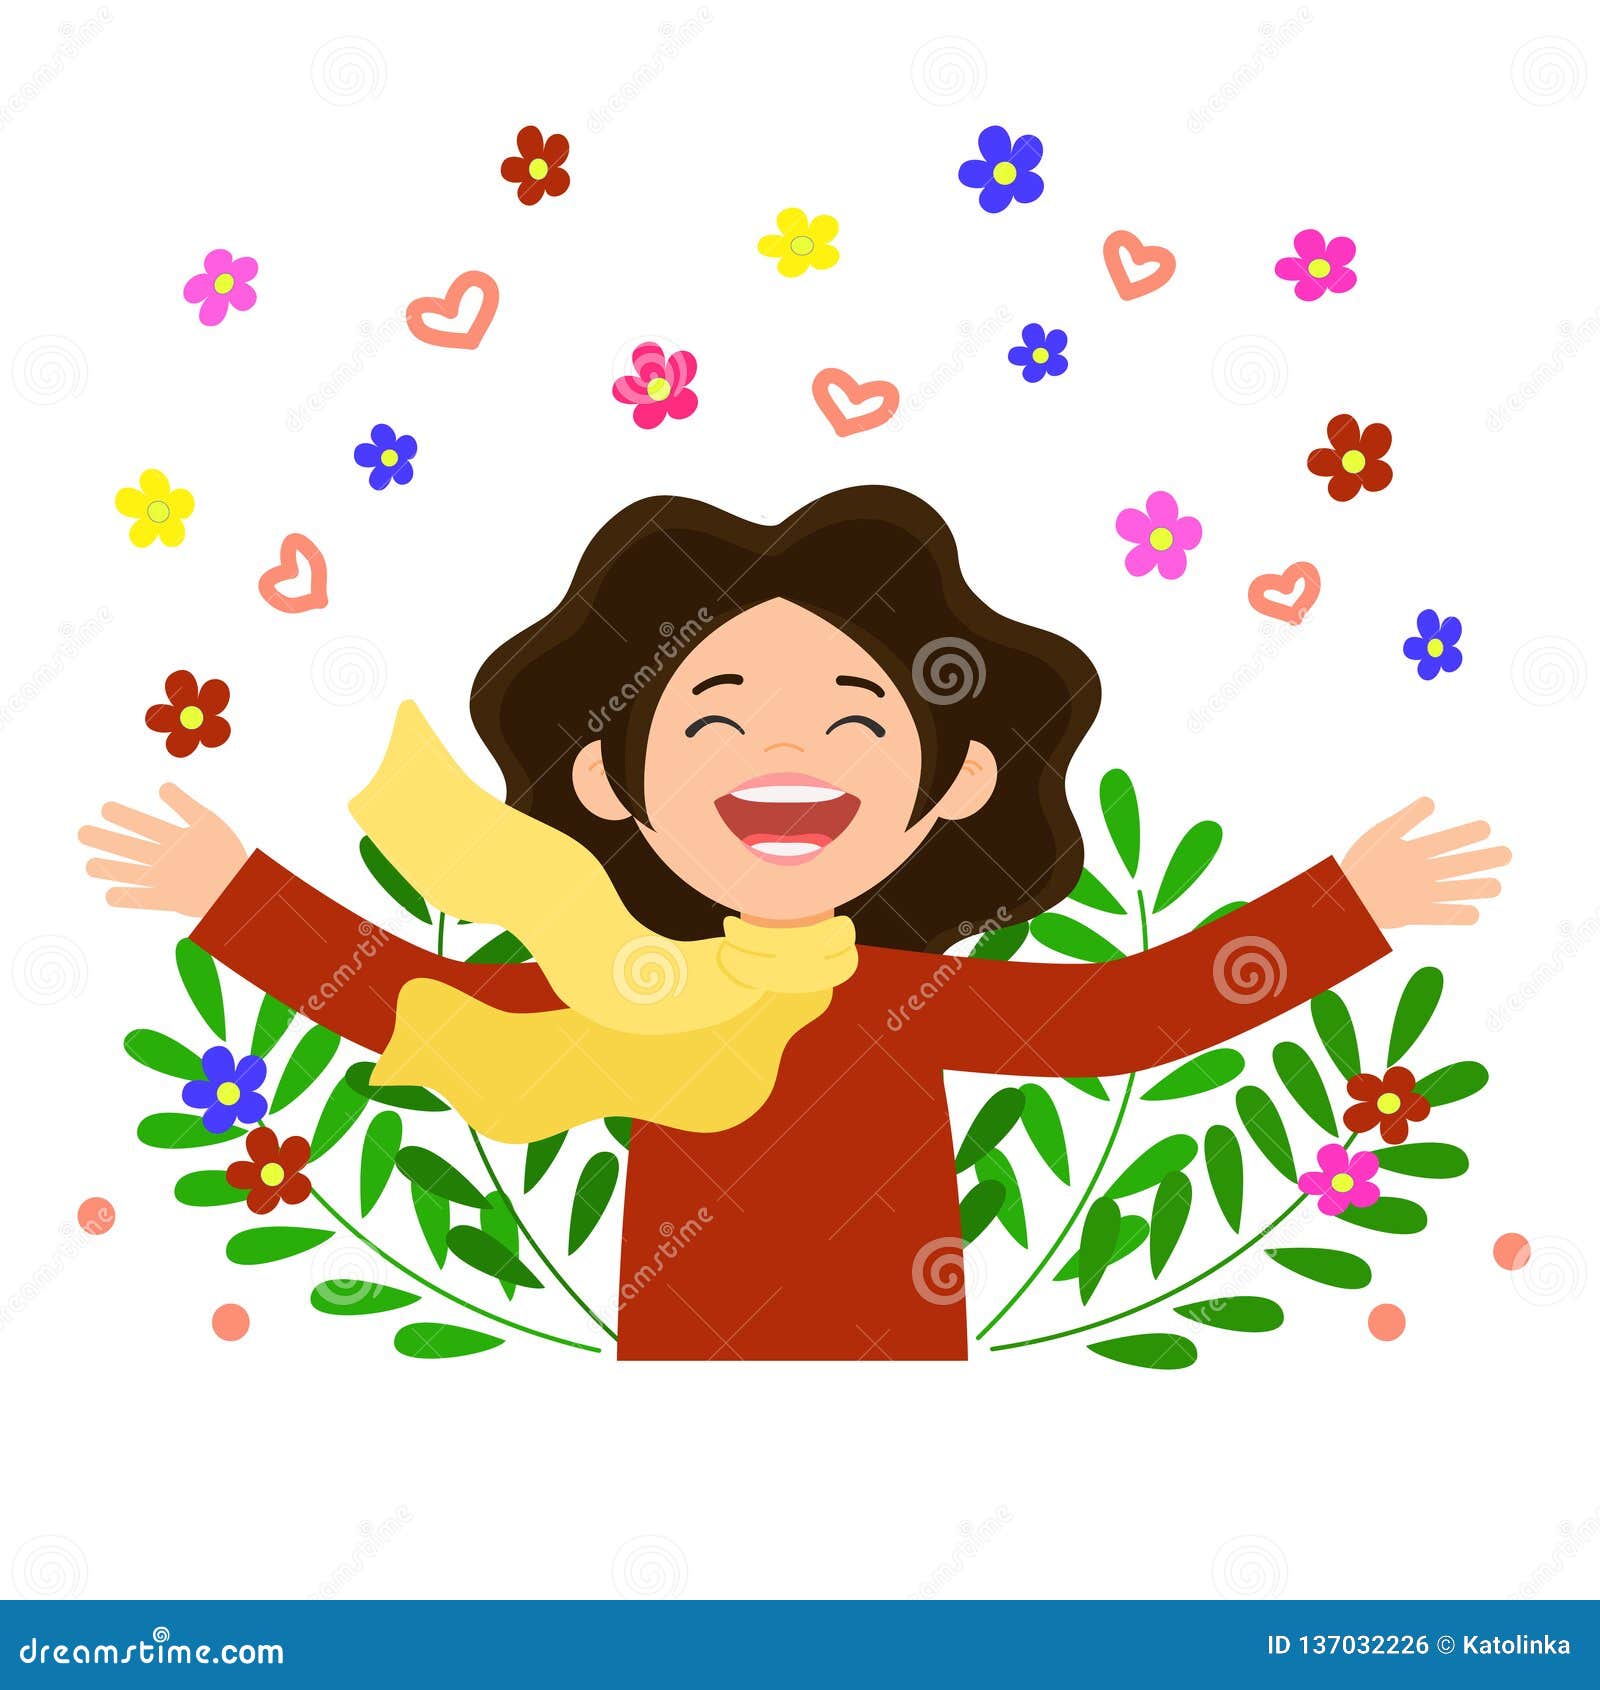 Happy Woman Surrounded By Flowers And Hearts Joyful Girl Widely Spread Her Hands To The Side And Smiling With Happiness Stock Illustration Illustration Of Flowers Rejoice